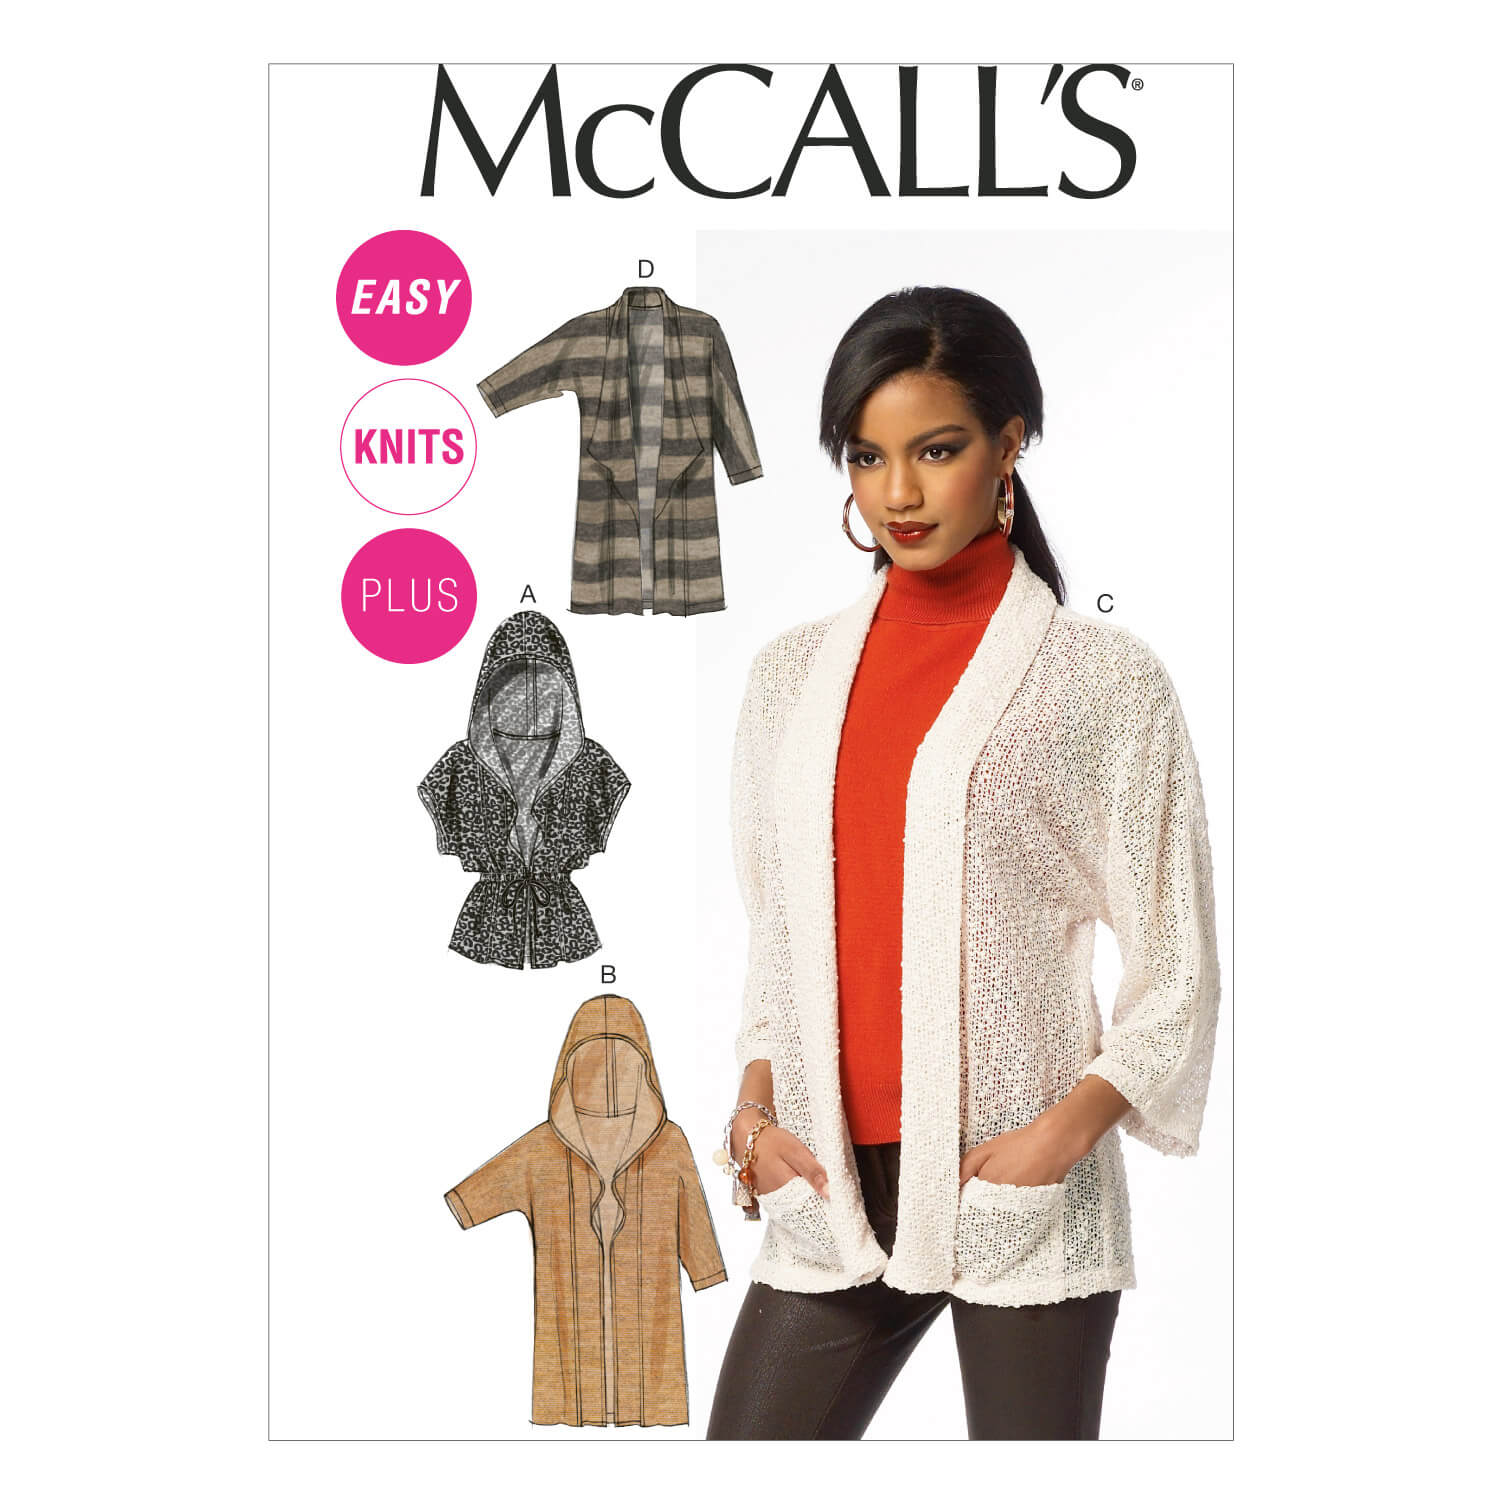 McCall's Sewing Pattern M6802 Misses'/Women's Cardigans